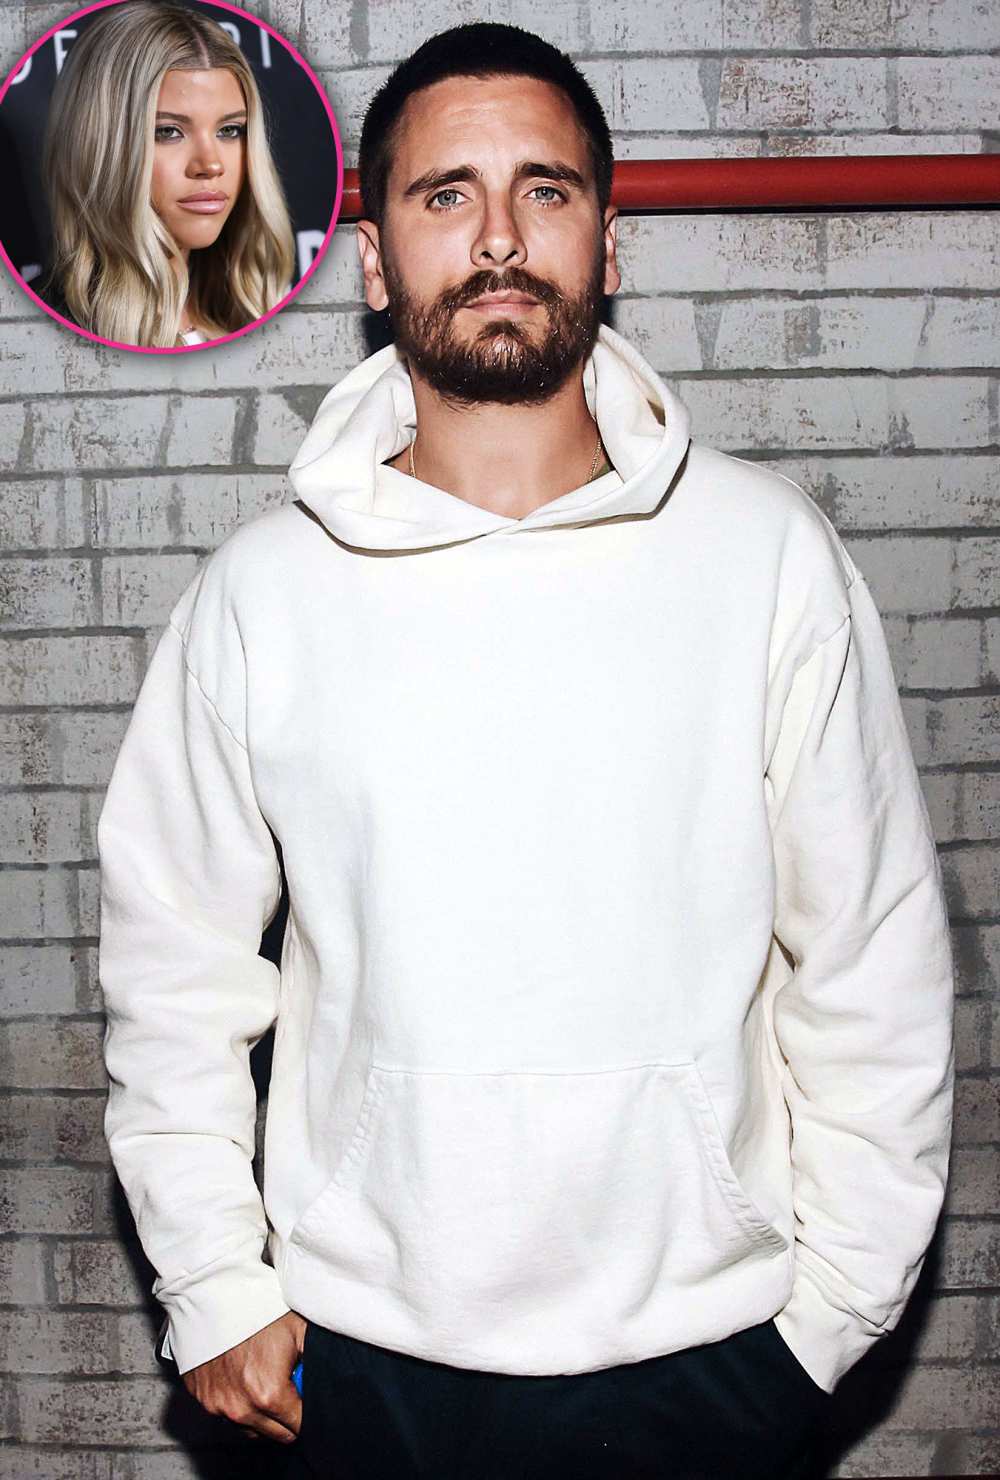 Scott Disick Knew He Was Going Down a ’Slippery Slope' Before Rehab